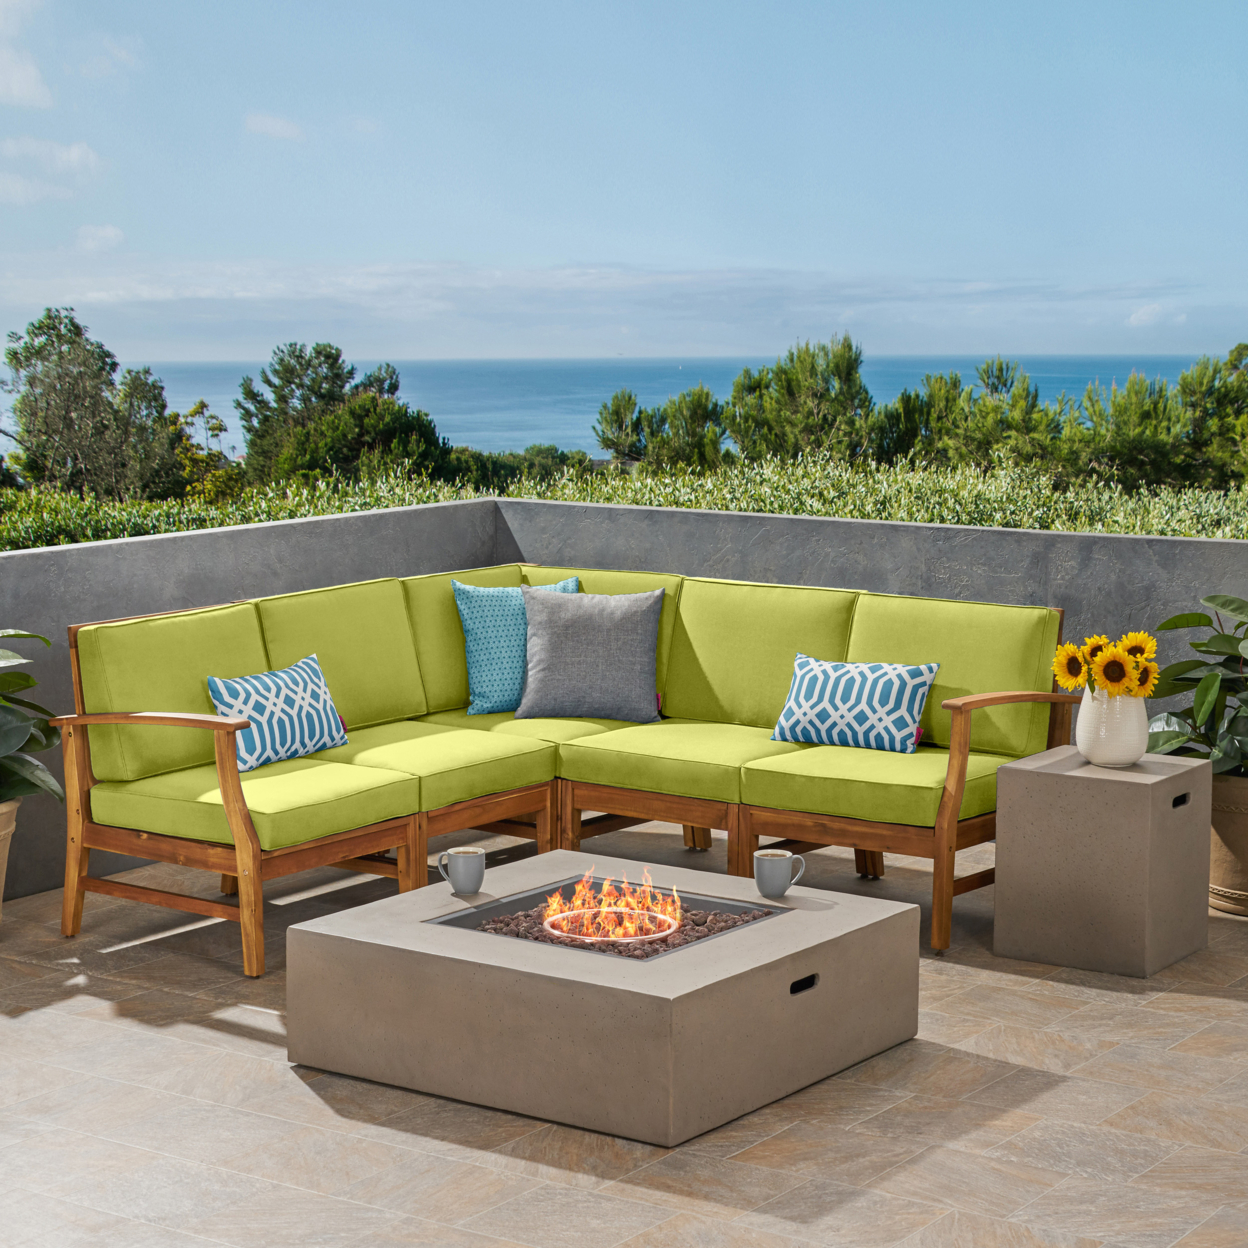 Esther Outdoor 5 Seater V-Shaped Acacia Wood Sofa Set With Square Fire Pit - Teak + Creme + Light Gray